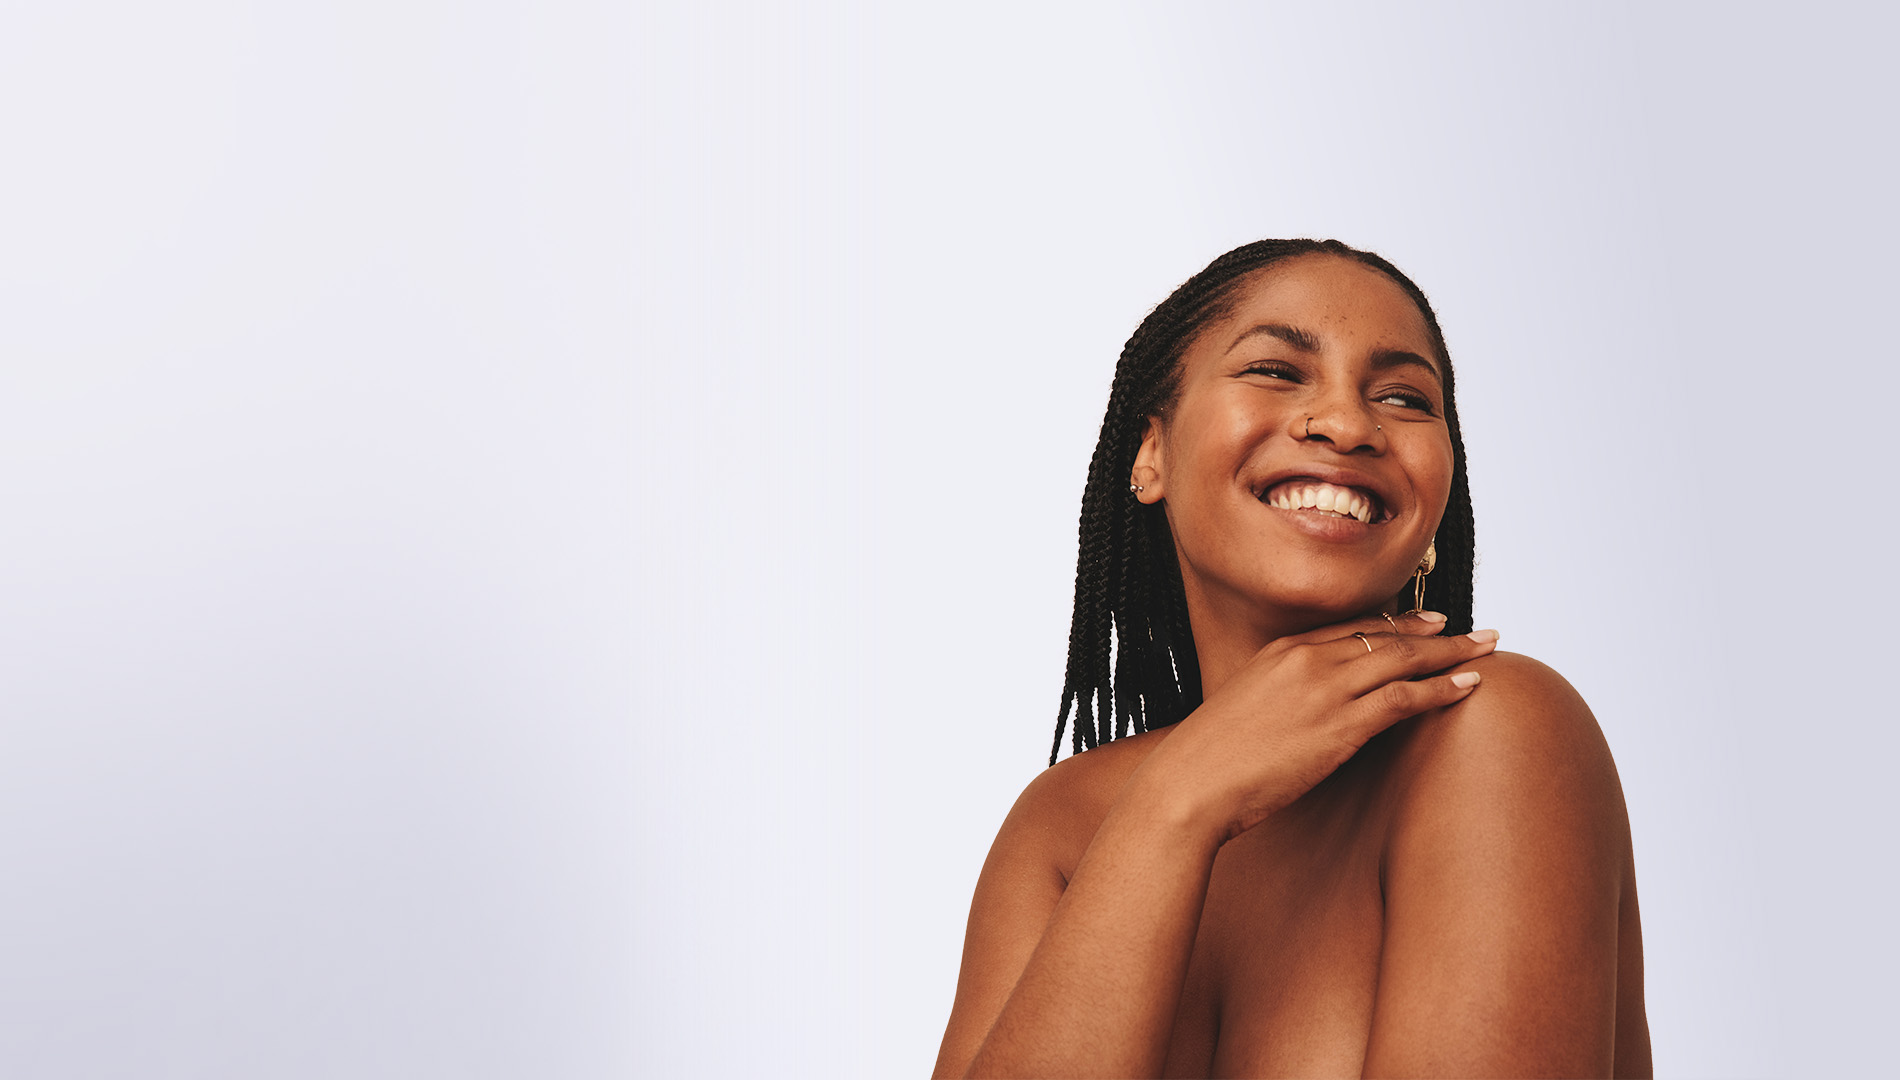 Cheerful black woman looking away with a smile